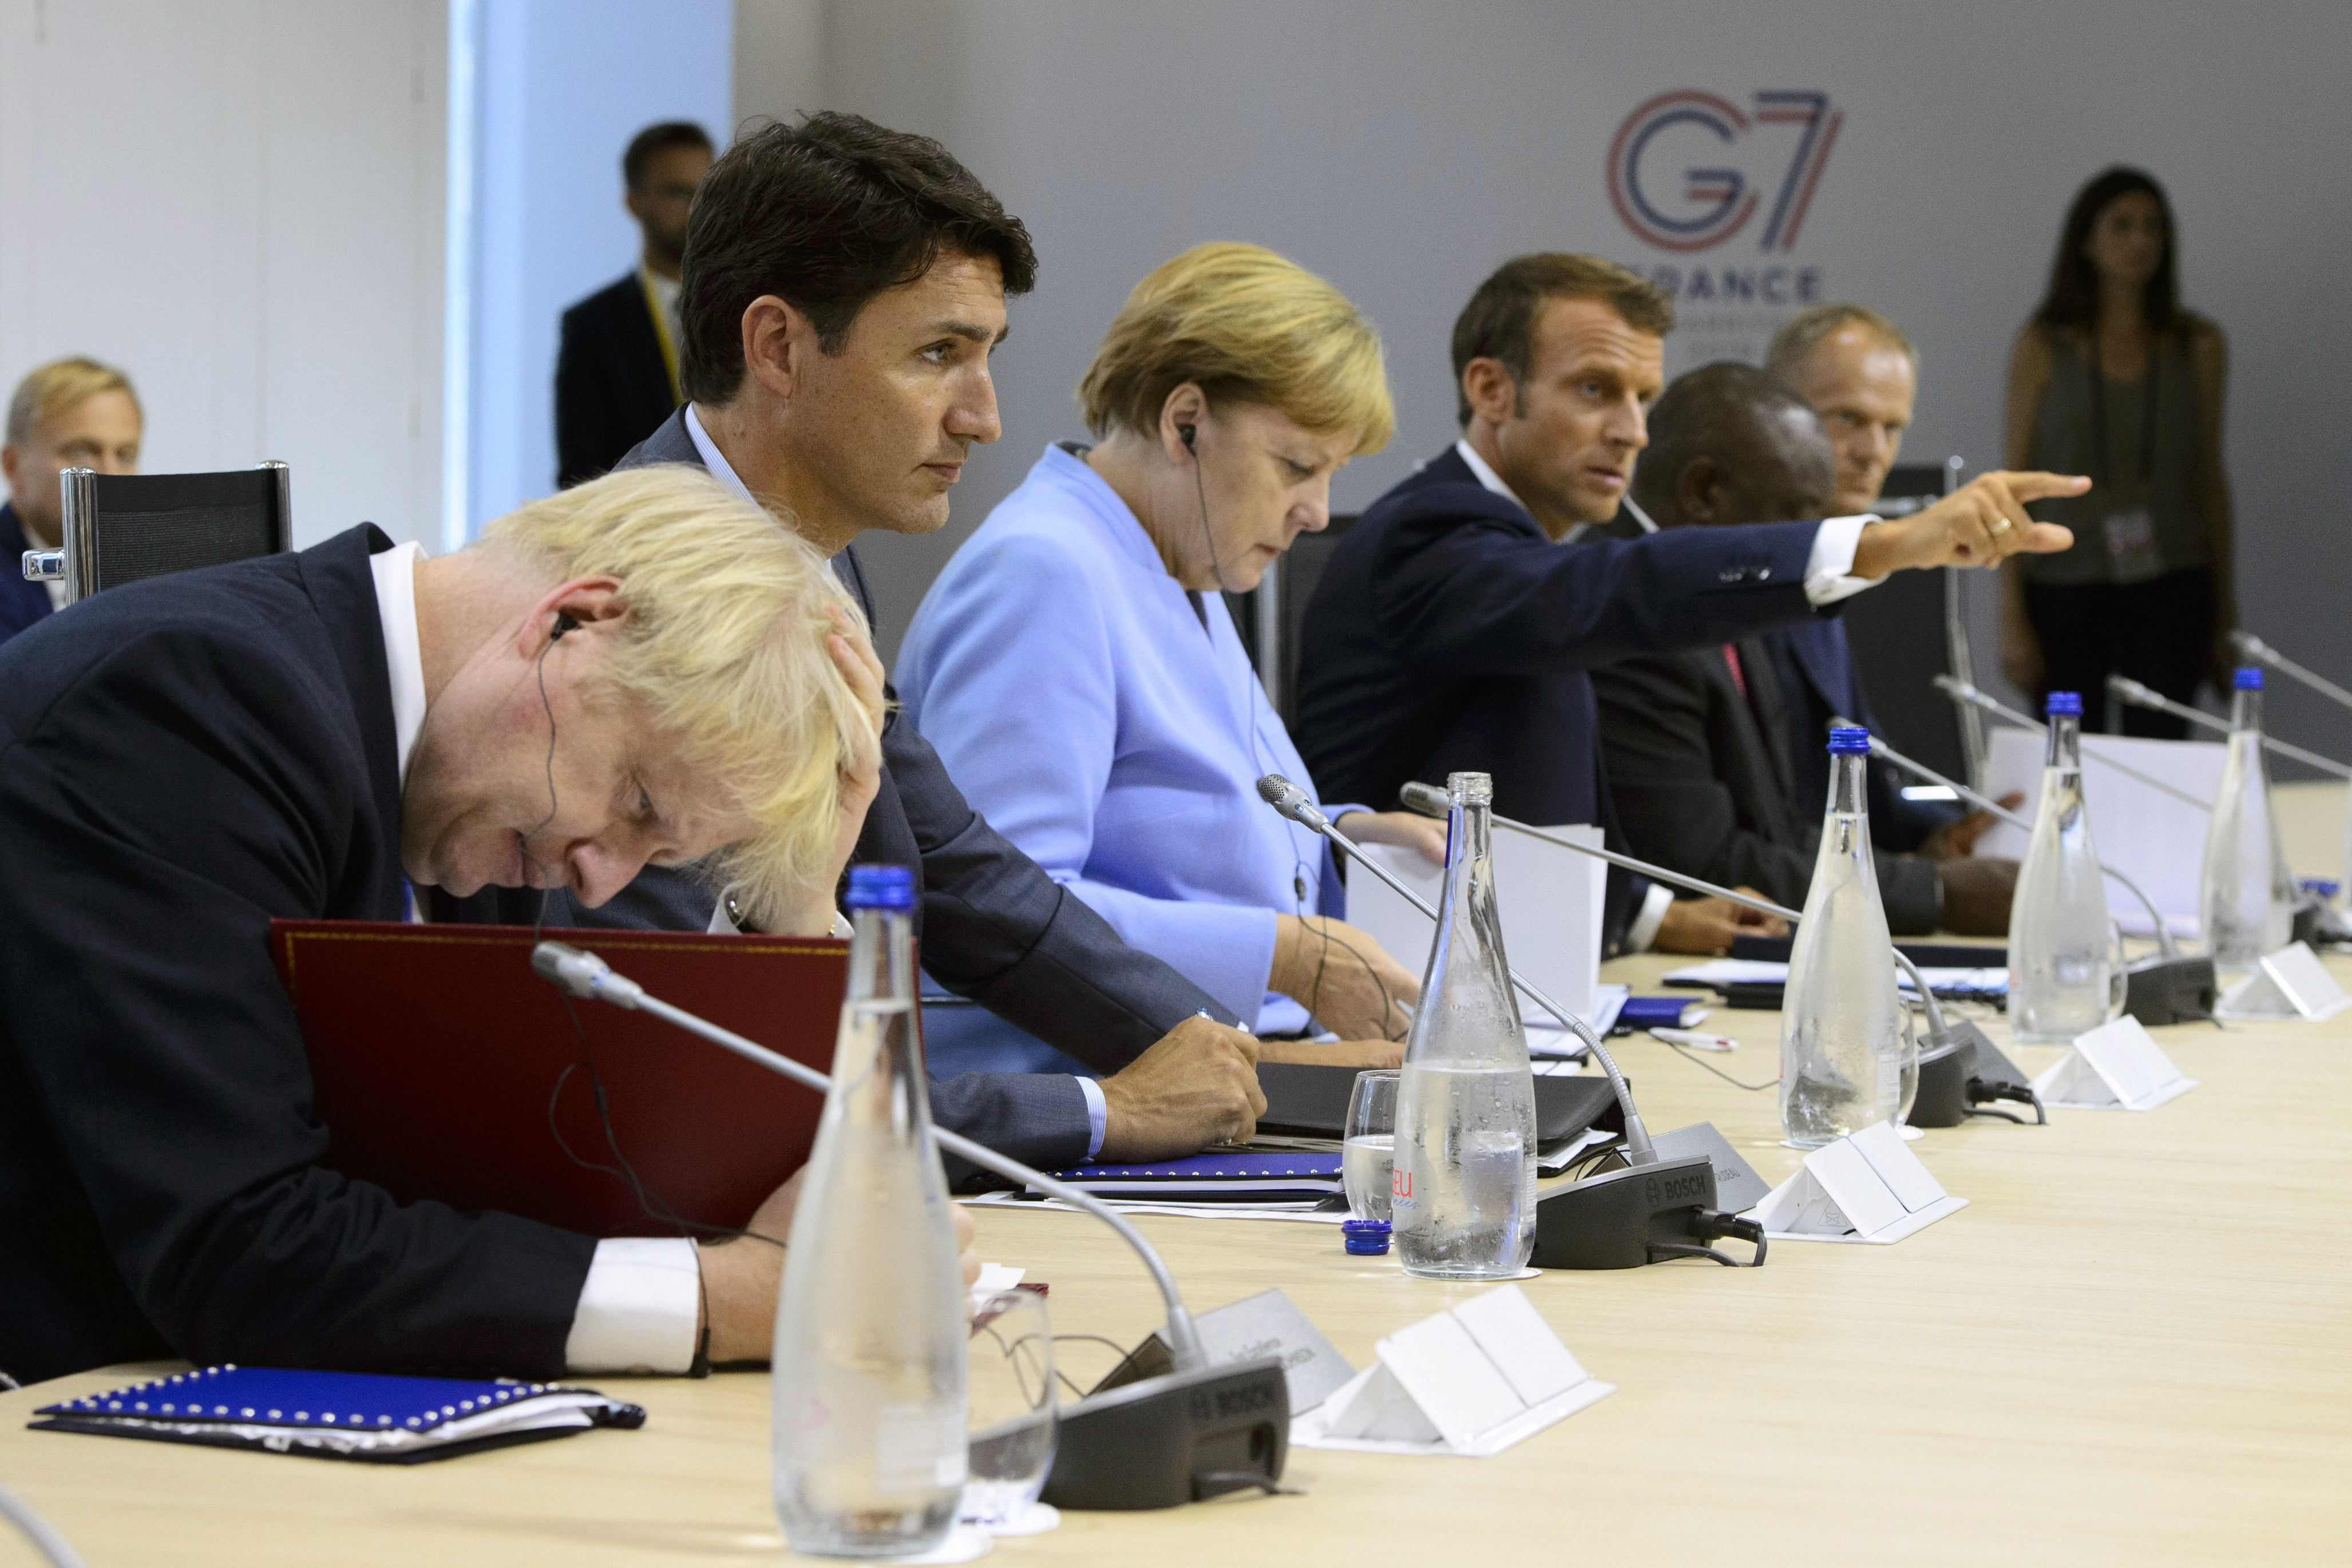 Canadian Prime Minister Justin Trudeau, second from left, sits between British Prime Minister Boris Johnson, left, and German Chancellor Angela Merkel as they take part in a meeting at the G7 Summit in Biarritz, France,  Monday, Aug. 26, 2019. Gesturing at right is French President Emmanuel Macron. (Sean Kilpatrick/The Canadian Press via AP)